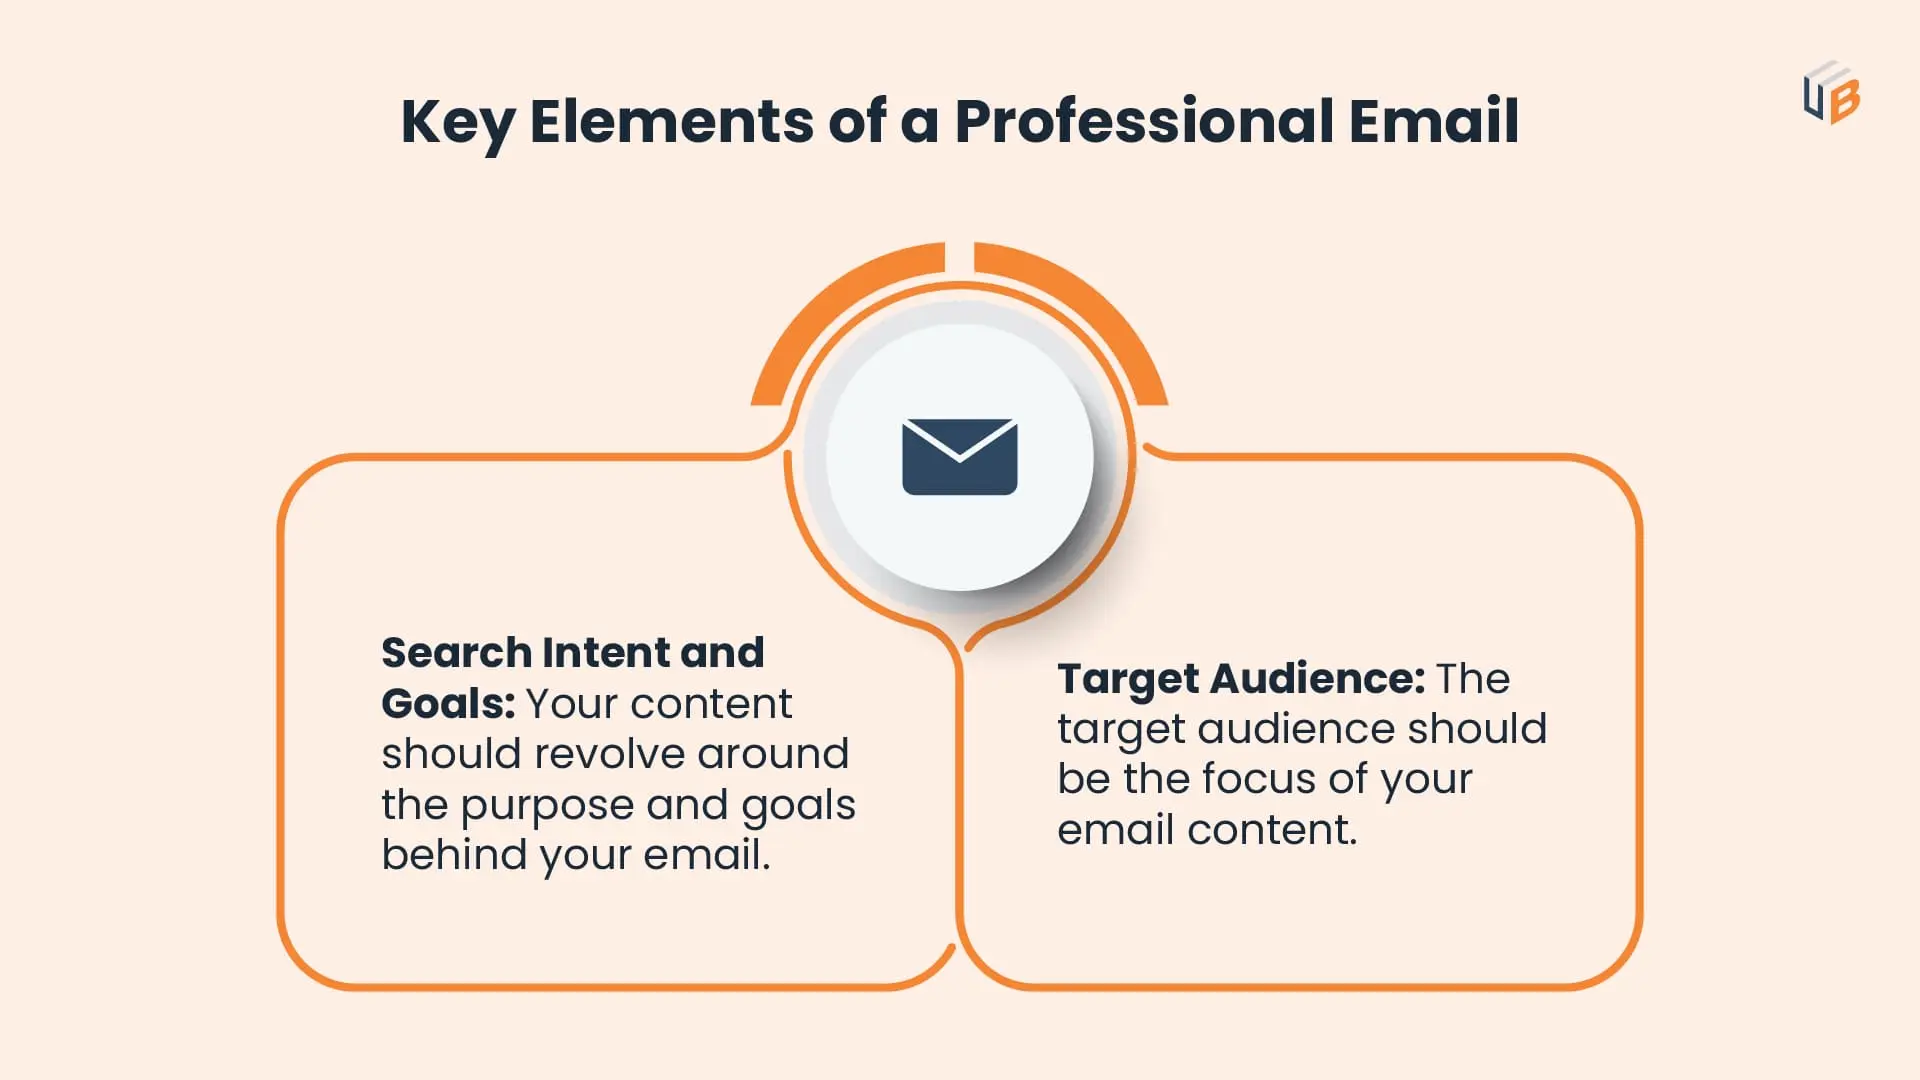 Keys Elements of a professional email